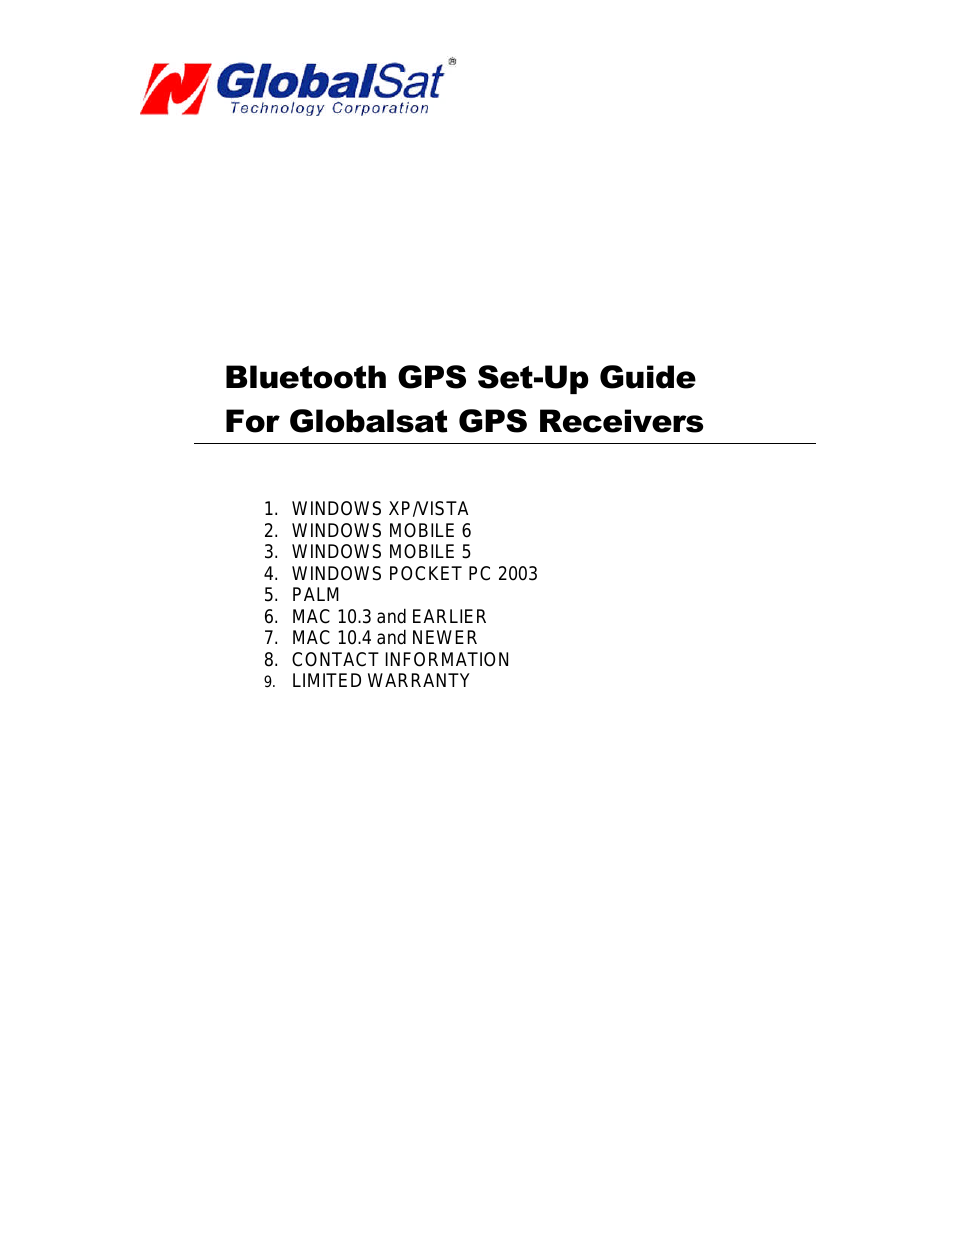 Bluetooth GPS Set-Up Guide For GPS Receivers